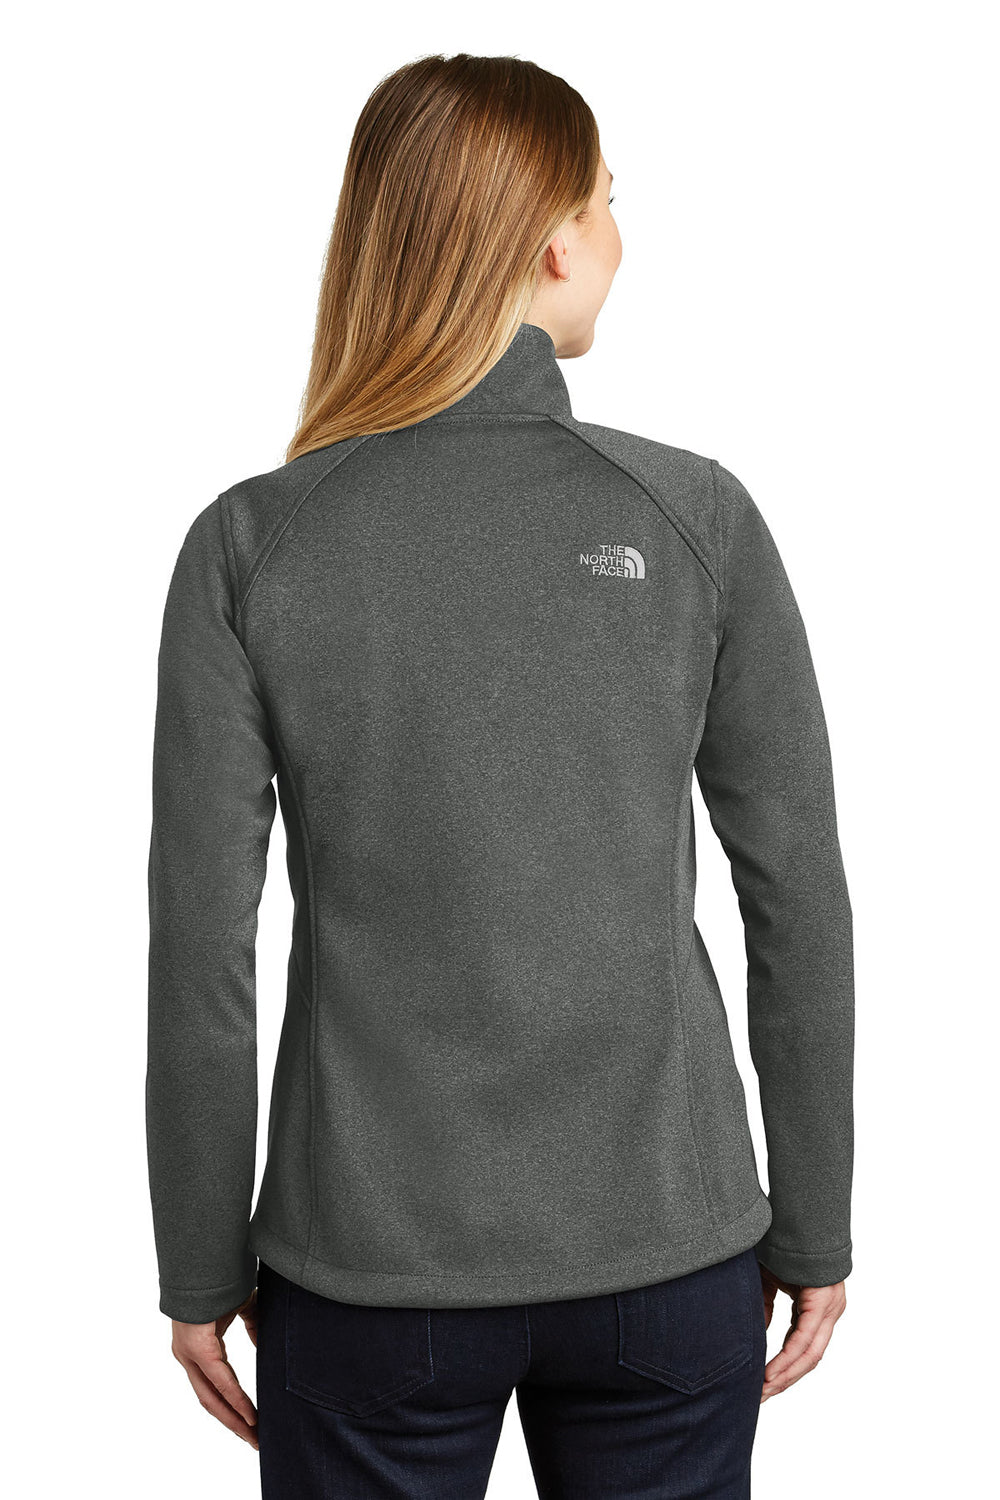 The North Face NF0A3LGY Womens Ridgeline Wind & Water Resistant Full Zip Jacket Heather Dark Grey Back